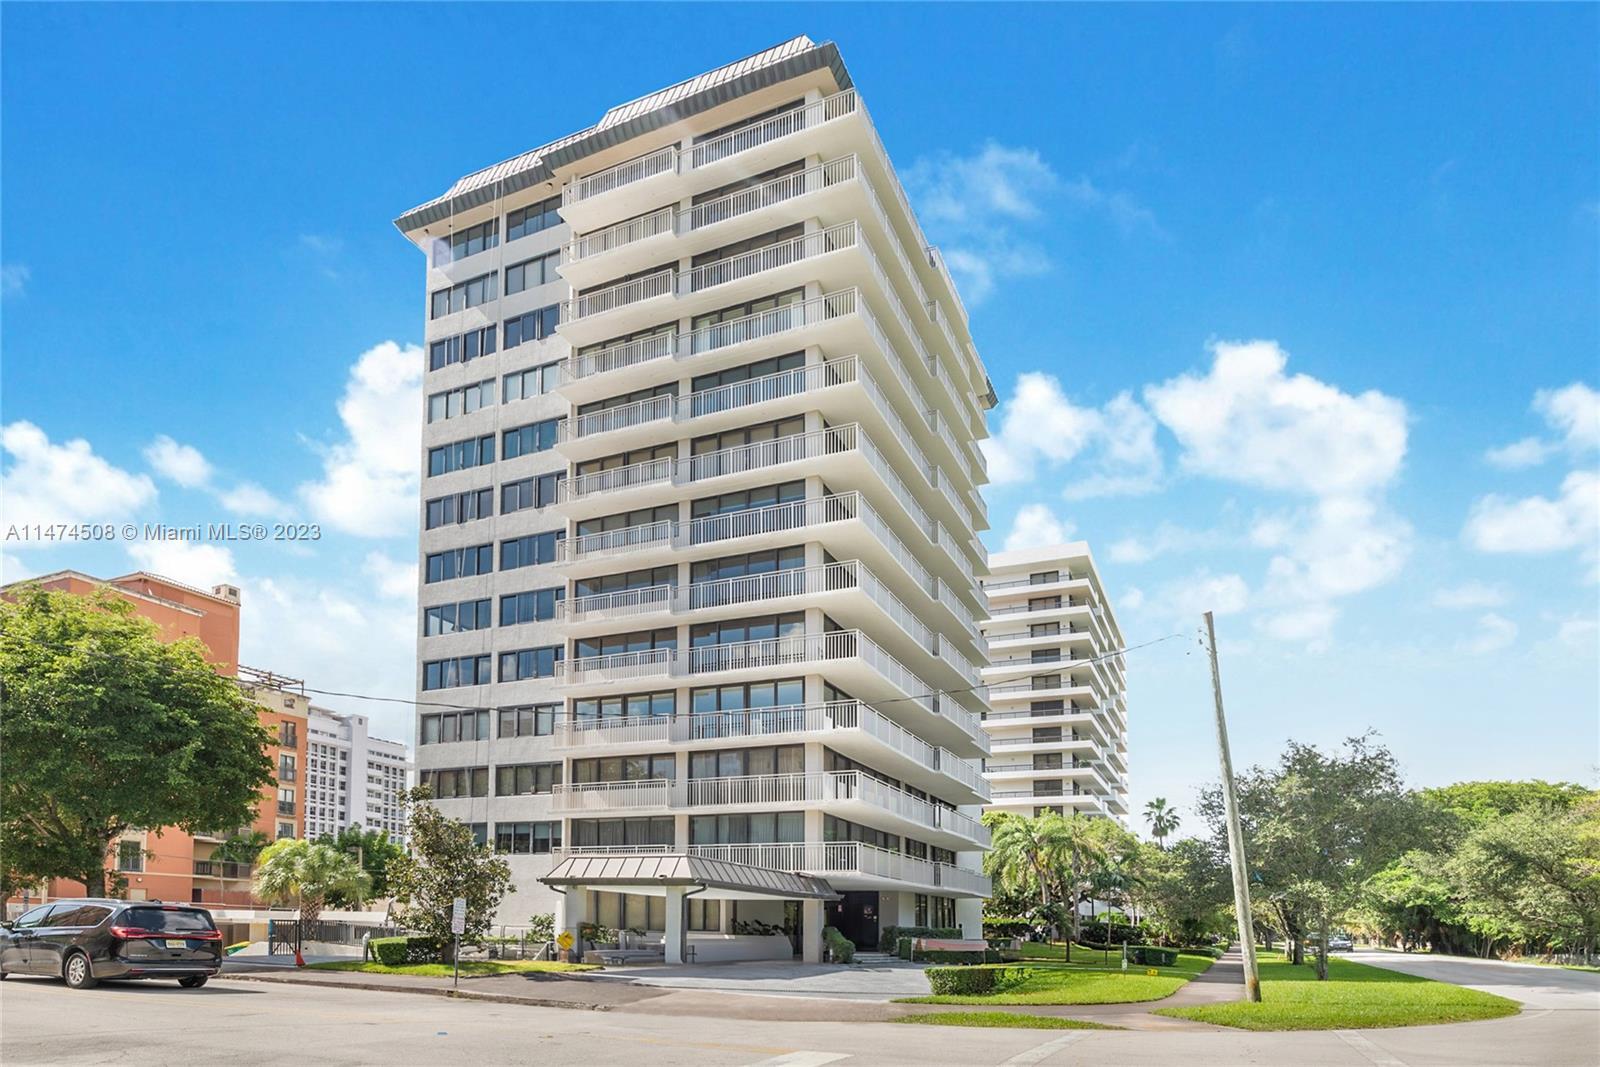 Photo of 700 Coral Wy #2 in Coral Gables, FL